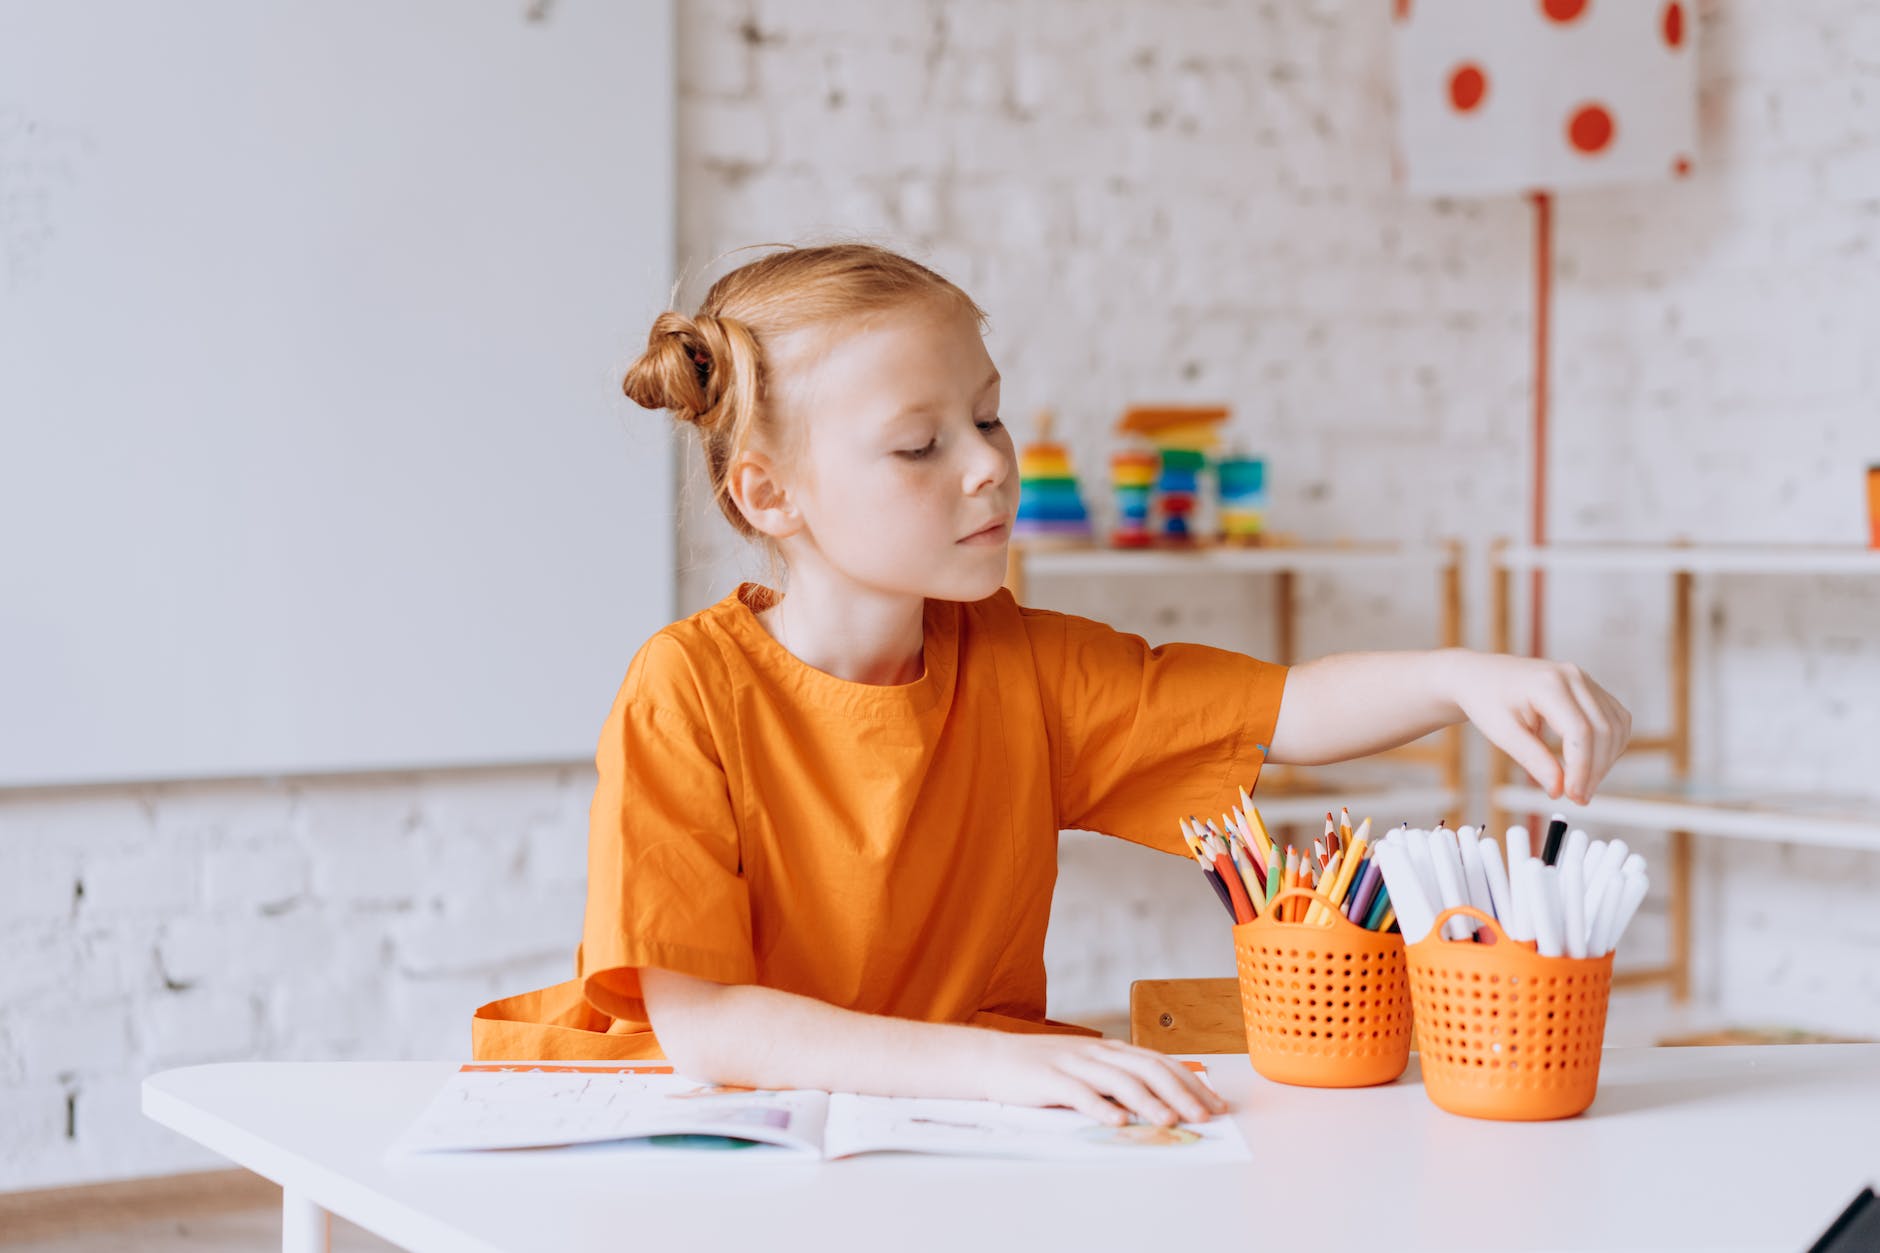 a girl in the classroom sitting at the desk with colored pencils